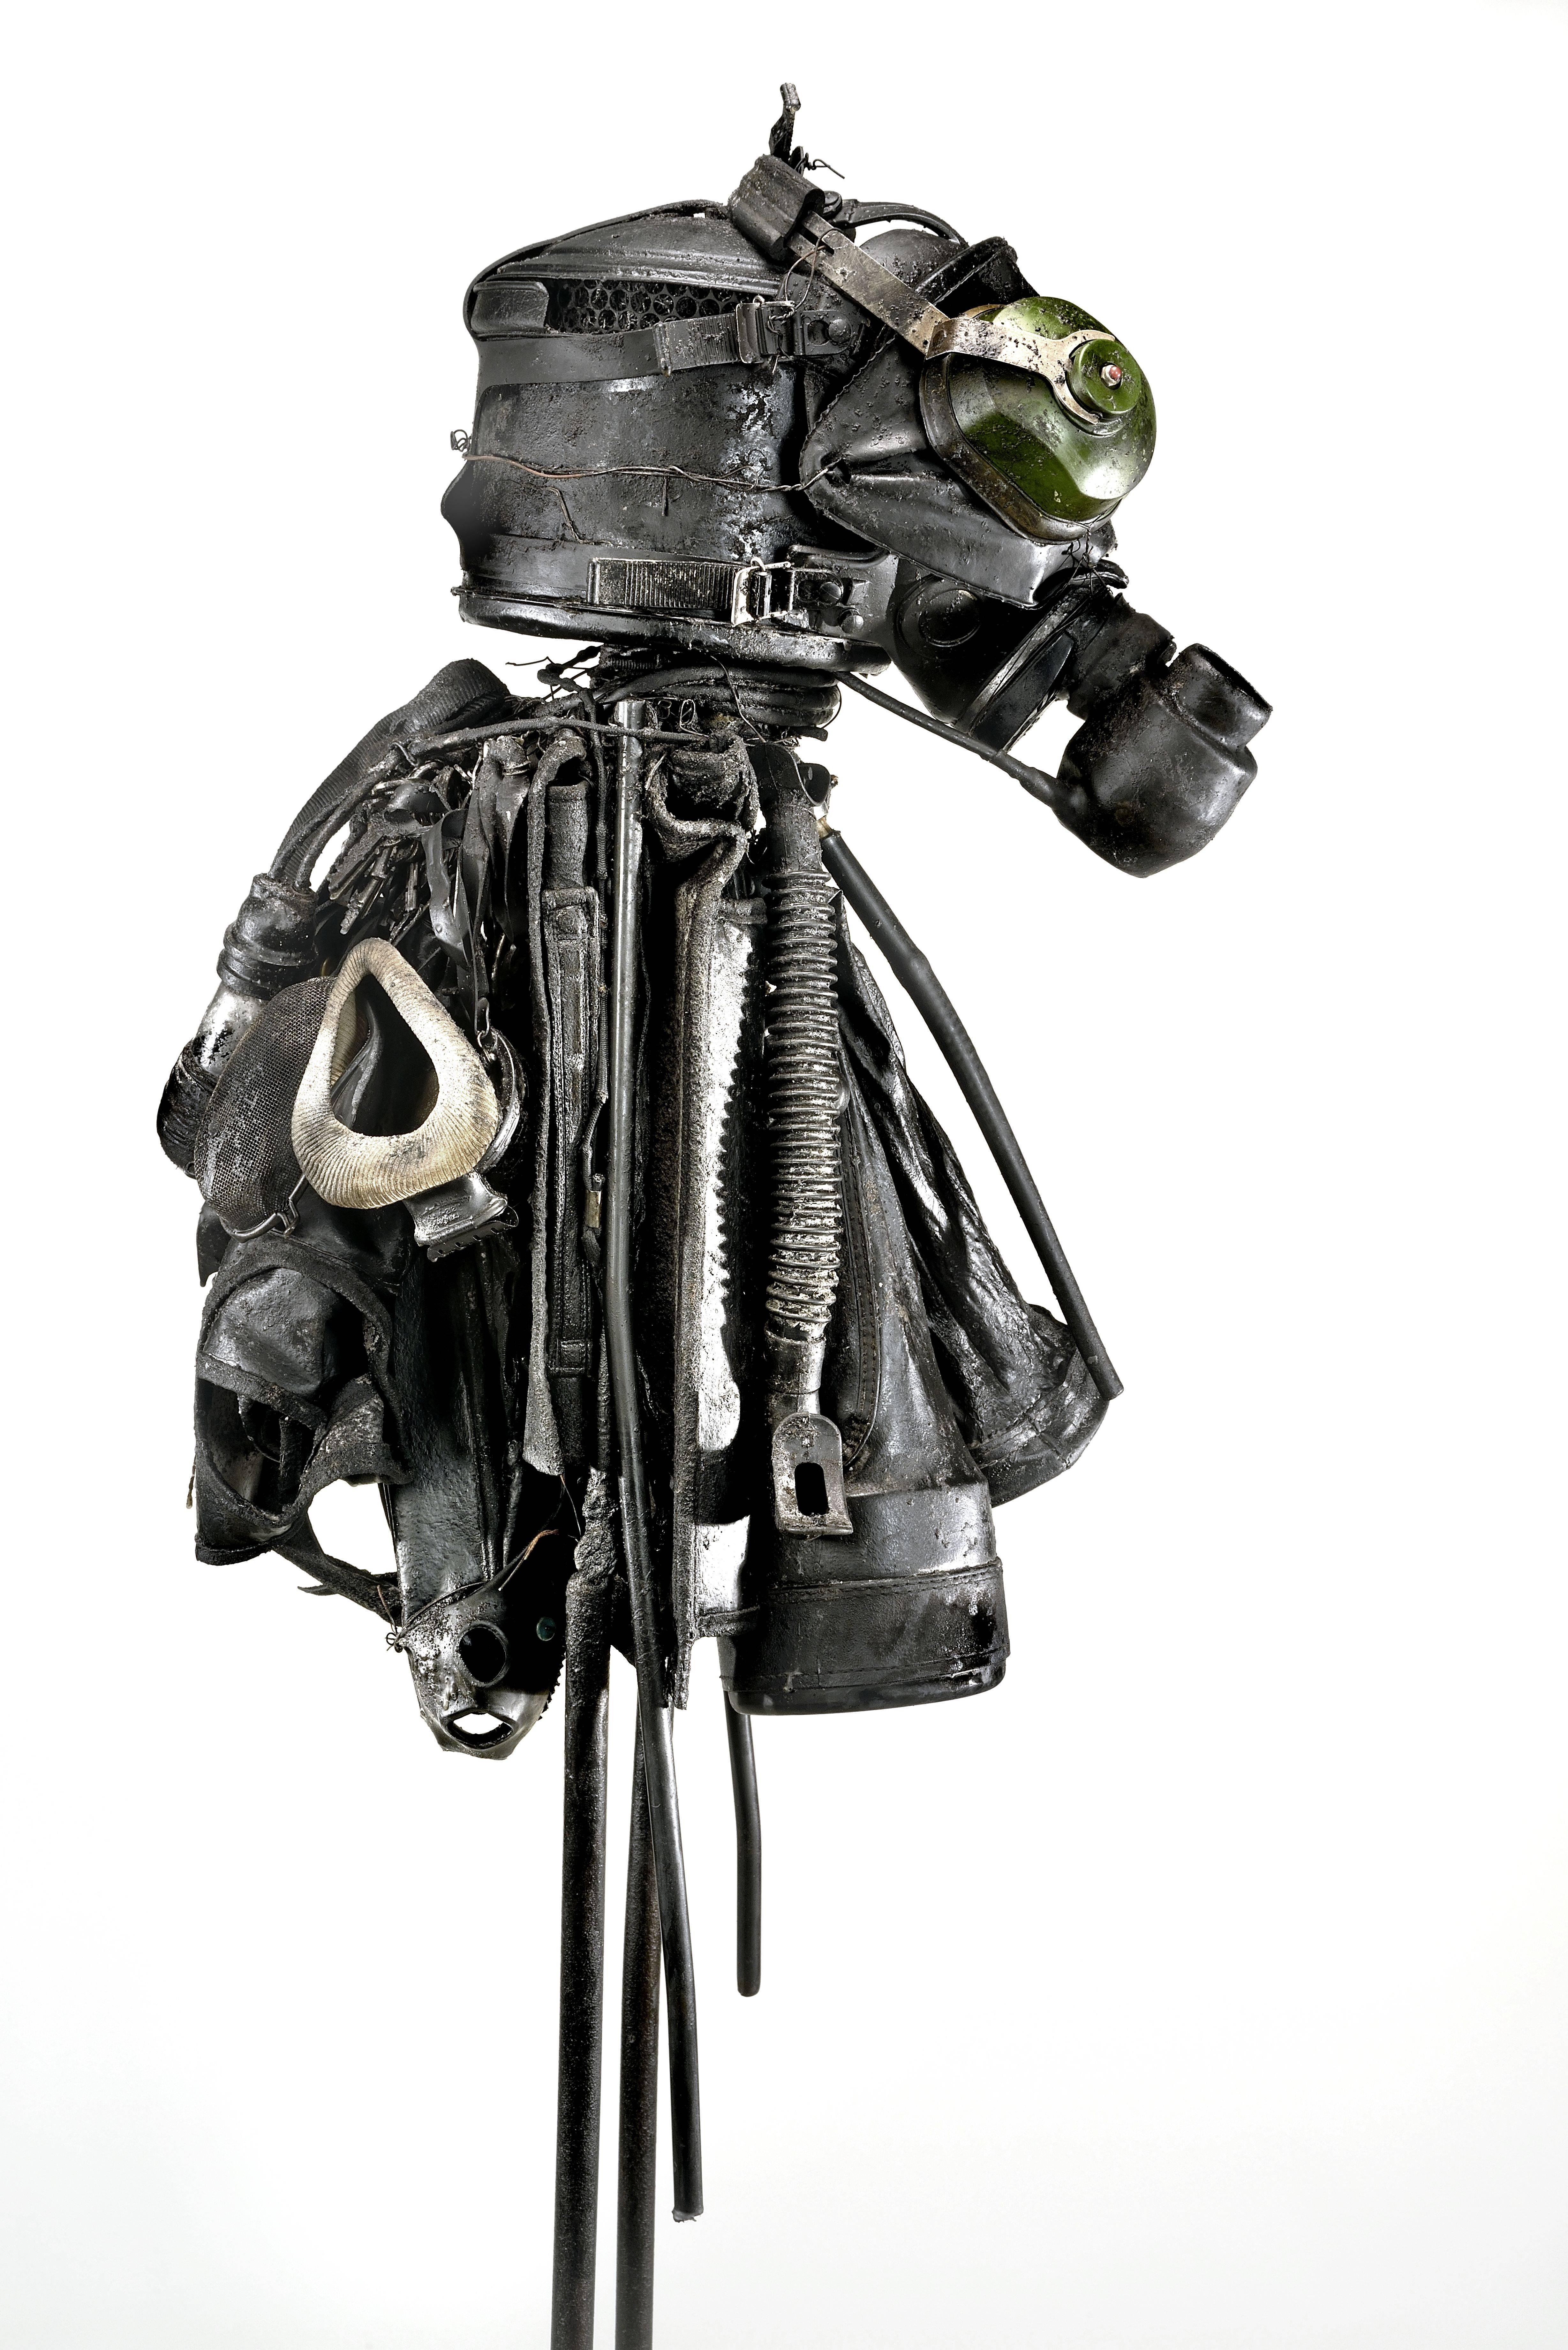 "Bug" is one of artist Ronald Gonzalez' Black Figures. At its core it is a rudimentary representation of a human, a stick figure constructed of steel rod. A dark conglomeration of artifacts make up its flesh: headphones, golf bag, snorkel,